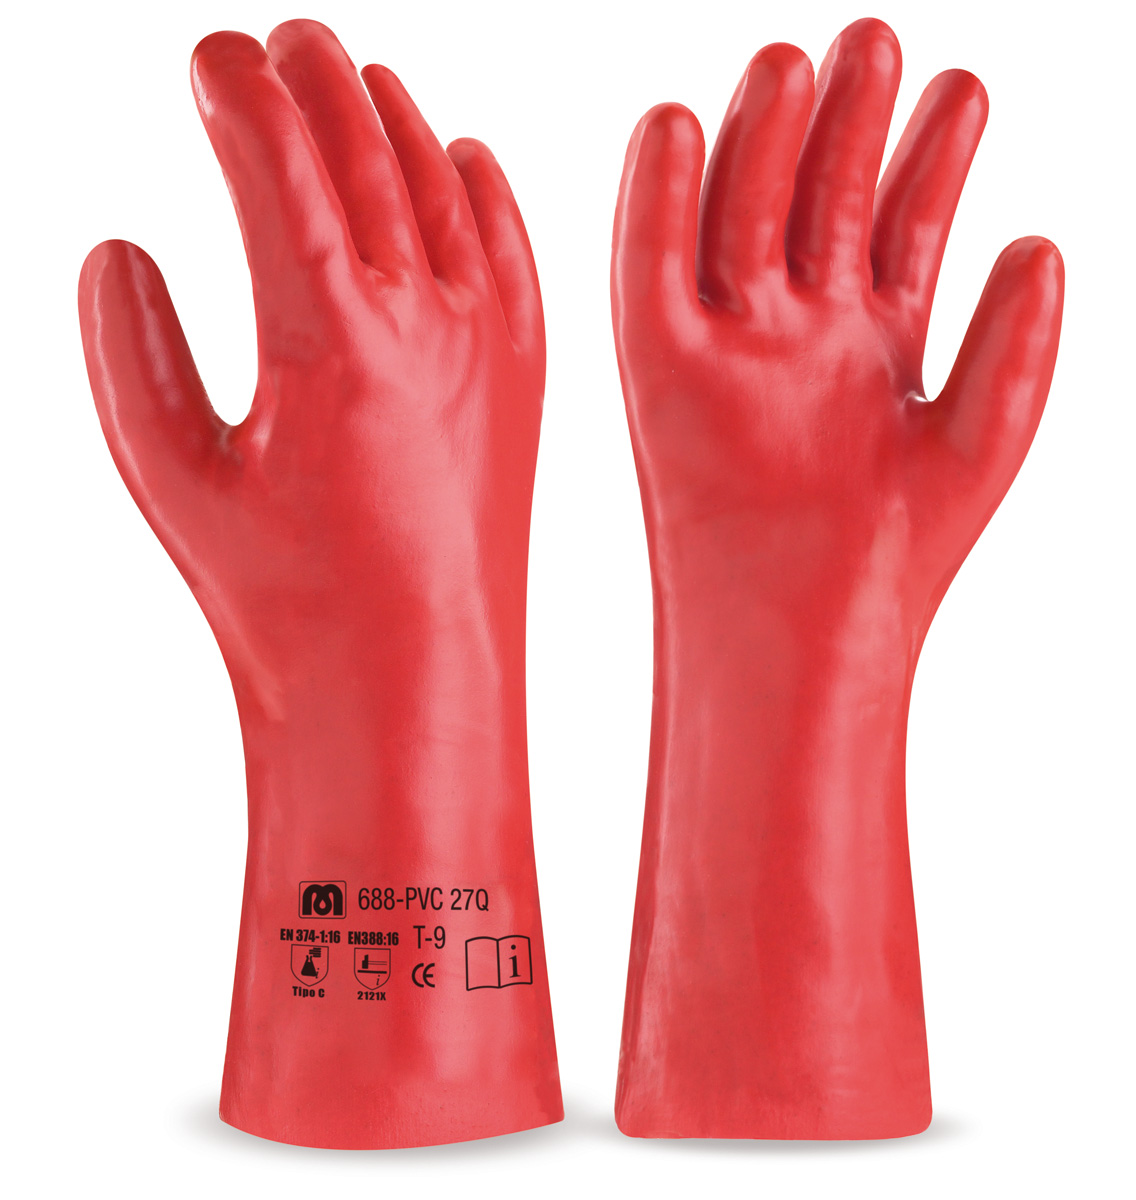 688-PVC 27Q Work Gloves PVC Watertight PVC glove (27cm), red for mechanical and chemical hazards